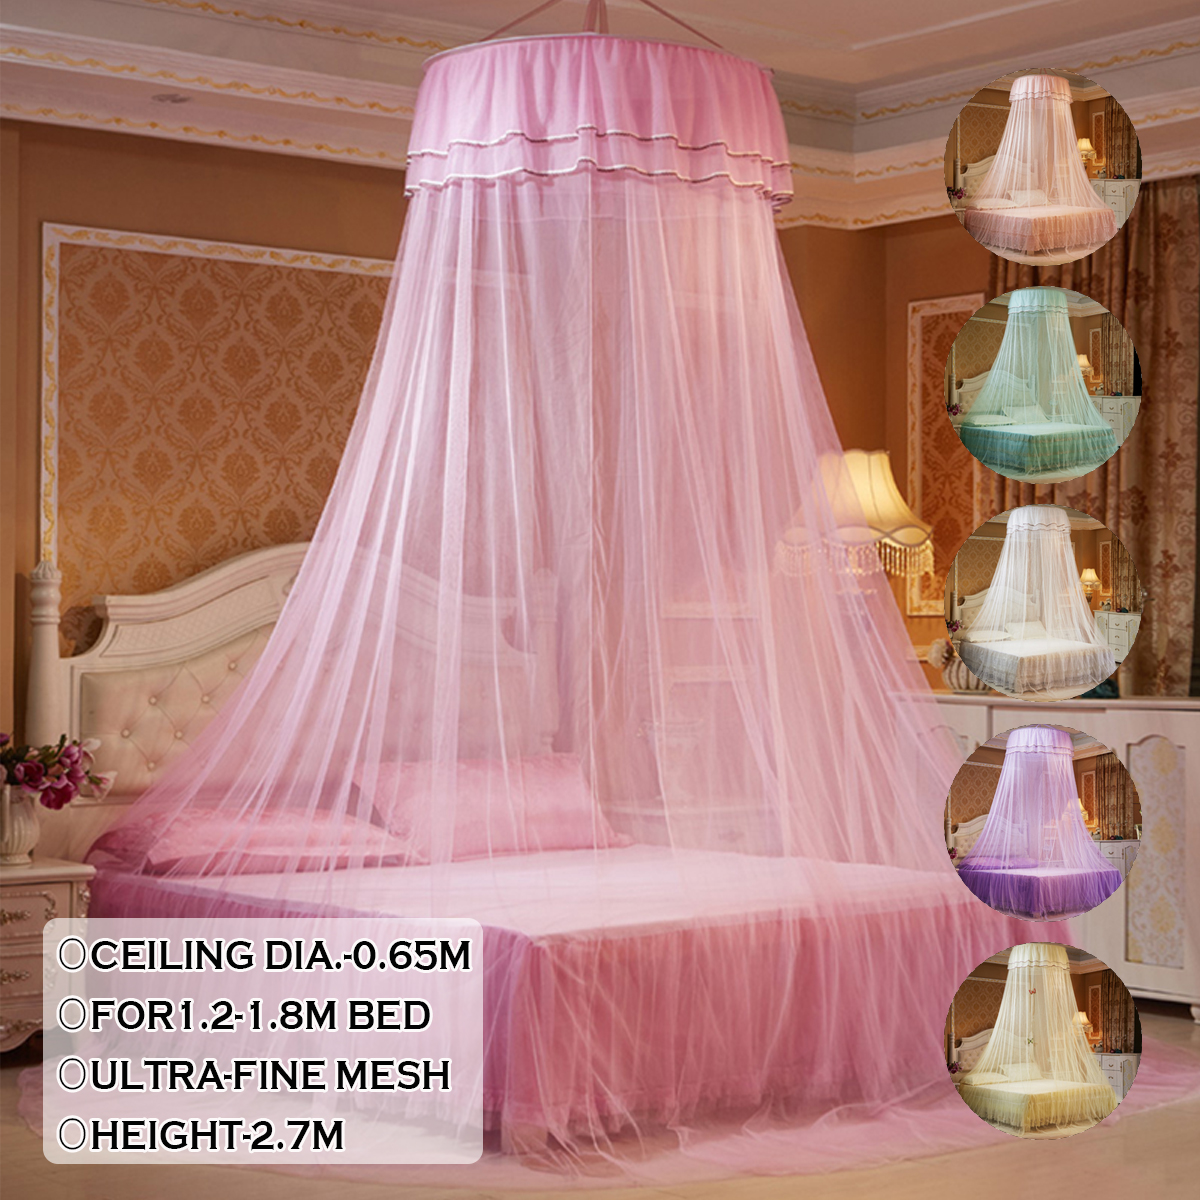 Mosquito Net Bed Queen Size Bedding Lace Canopy Elegant Netting Princess Home 